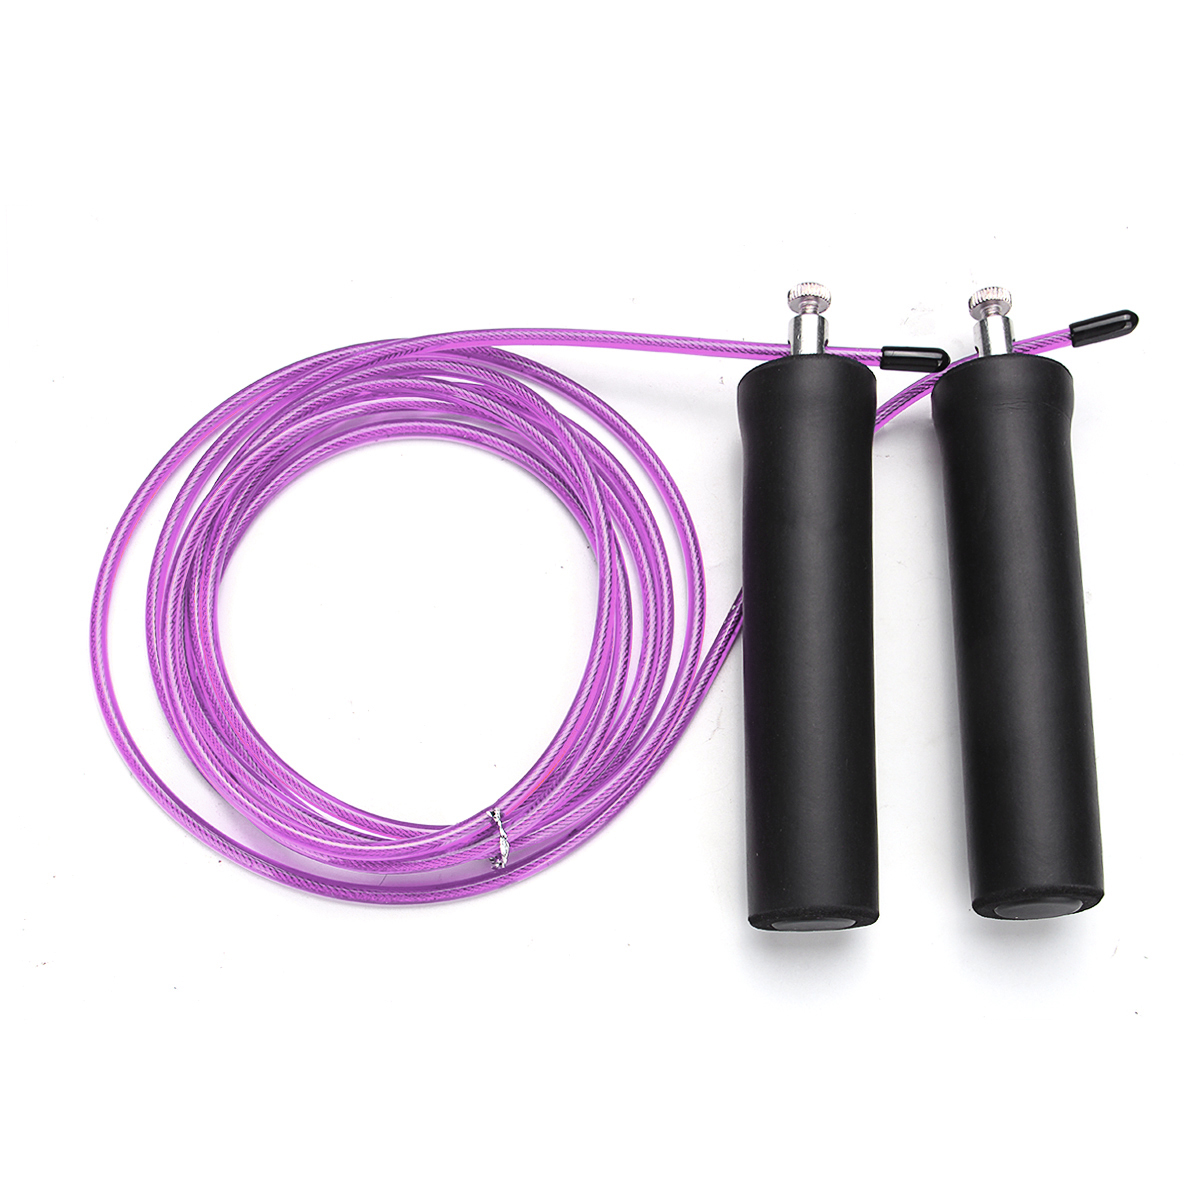 3M-Steel-Wire-Speed-Skipping-Rope-Jumping-Rope-Adjustable-Crossfit-Fitnesss-Exercise-1307727-6